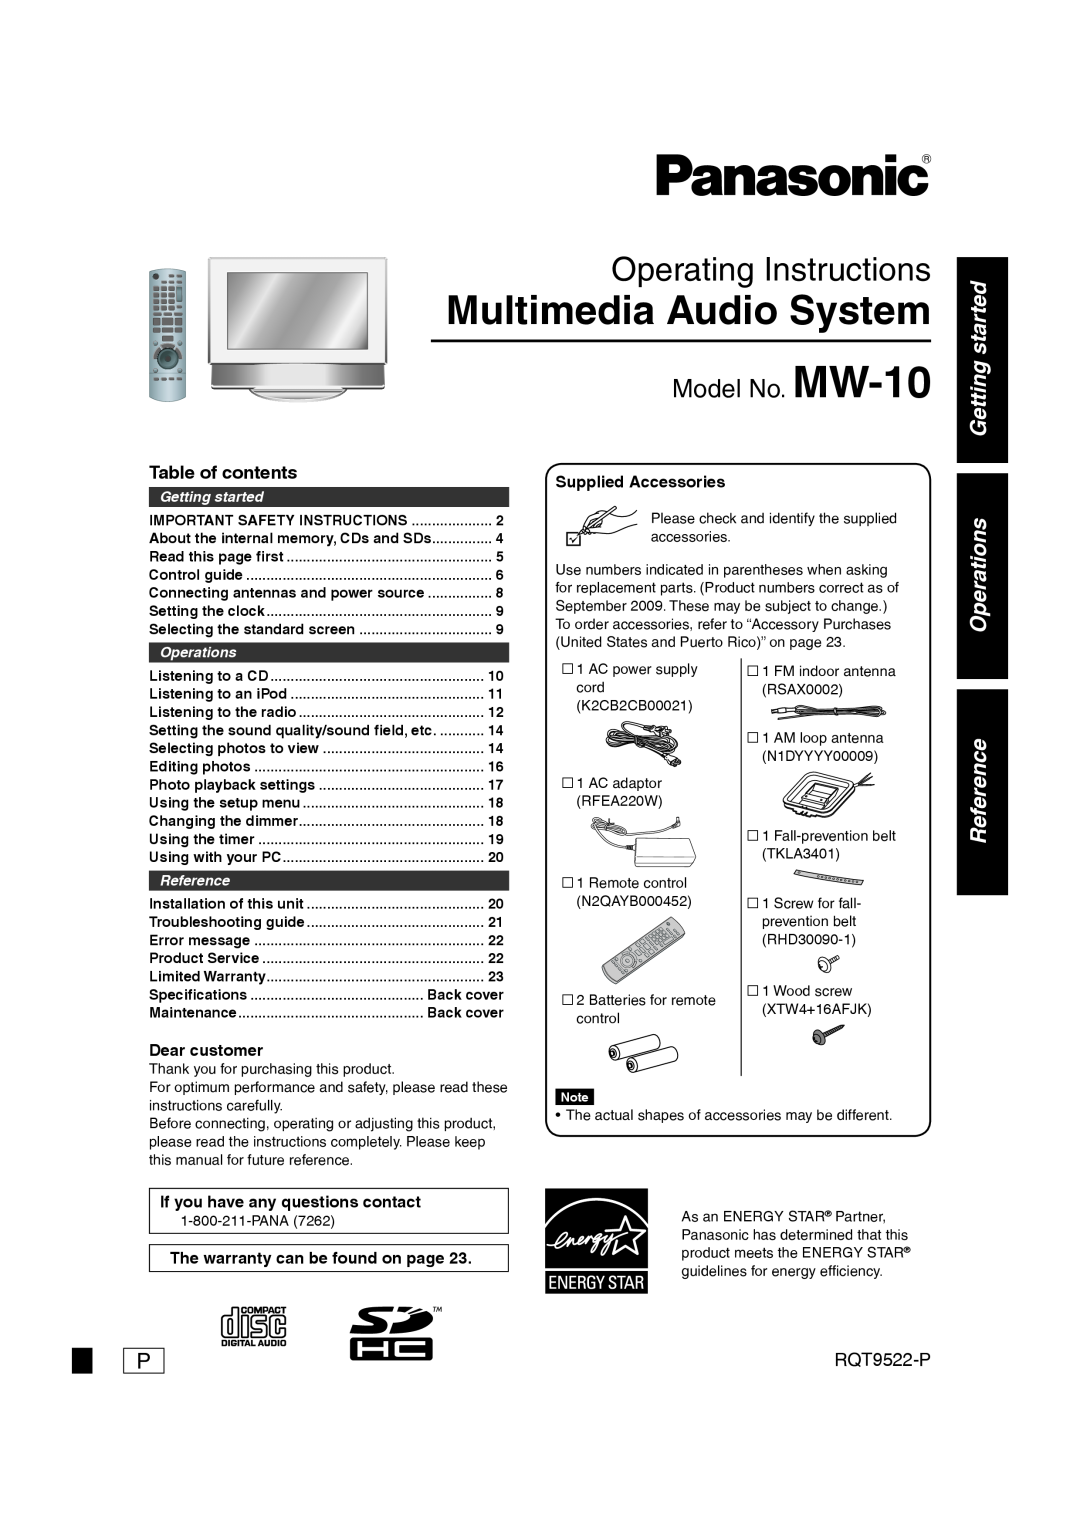 Panasonic MW-10 operating instructions Getting started, Operations, Reference, RQT9522-P, Multimedia Audio System 